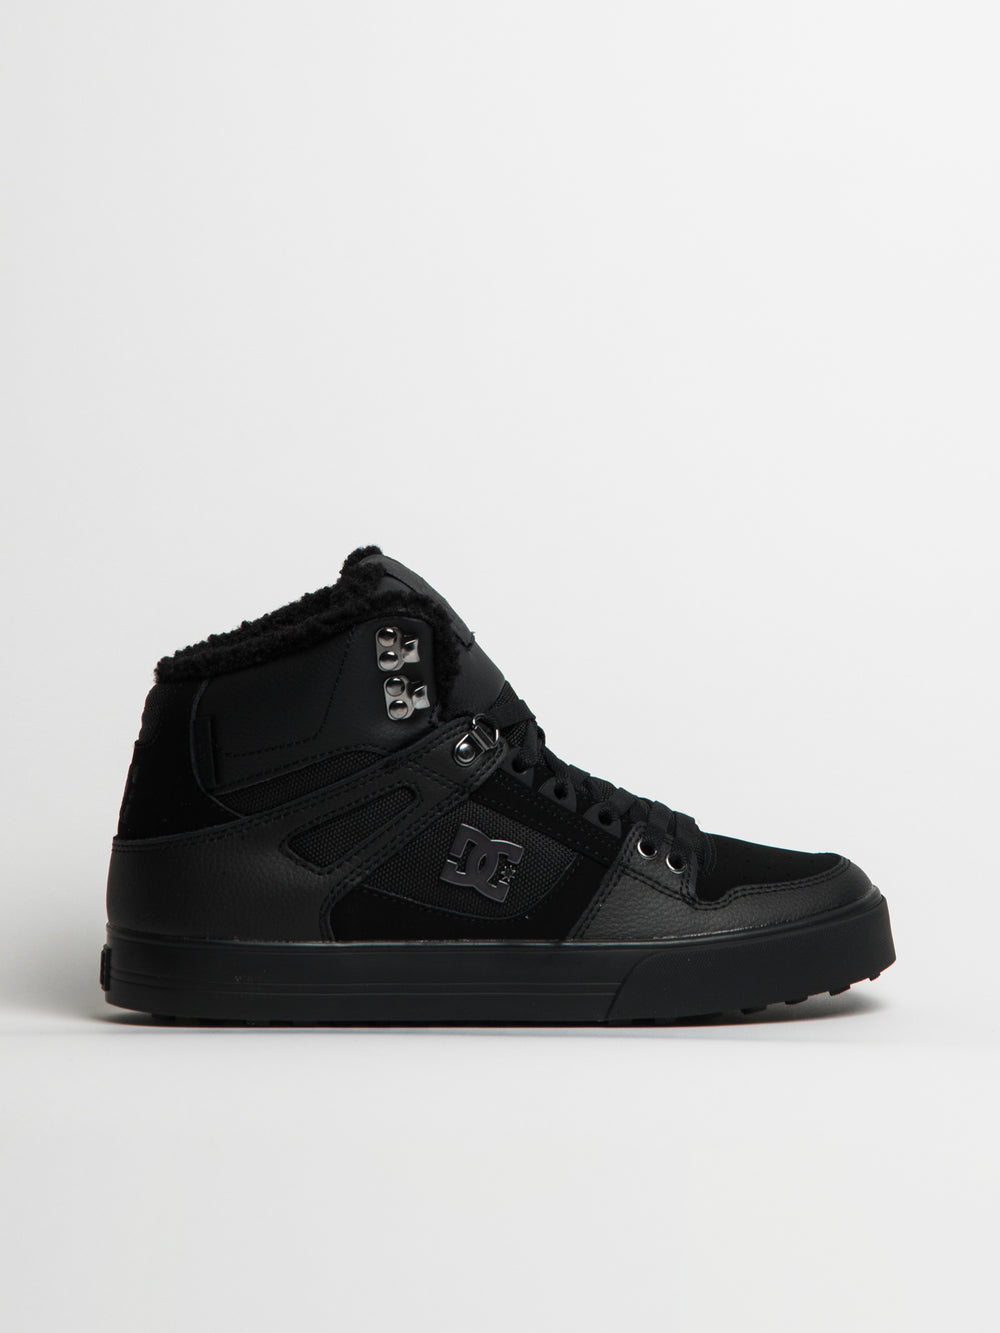 MENS DC SHOES PURE HIGH TOP WC BOOT